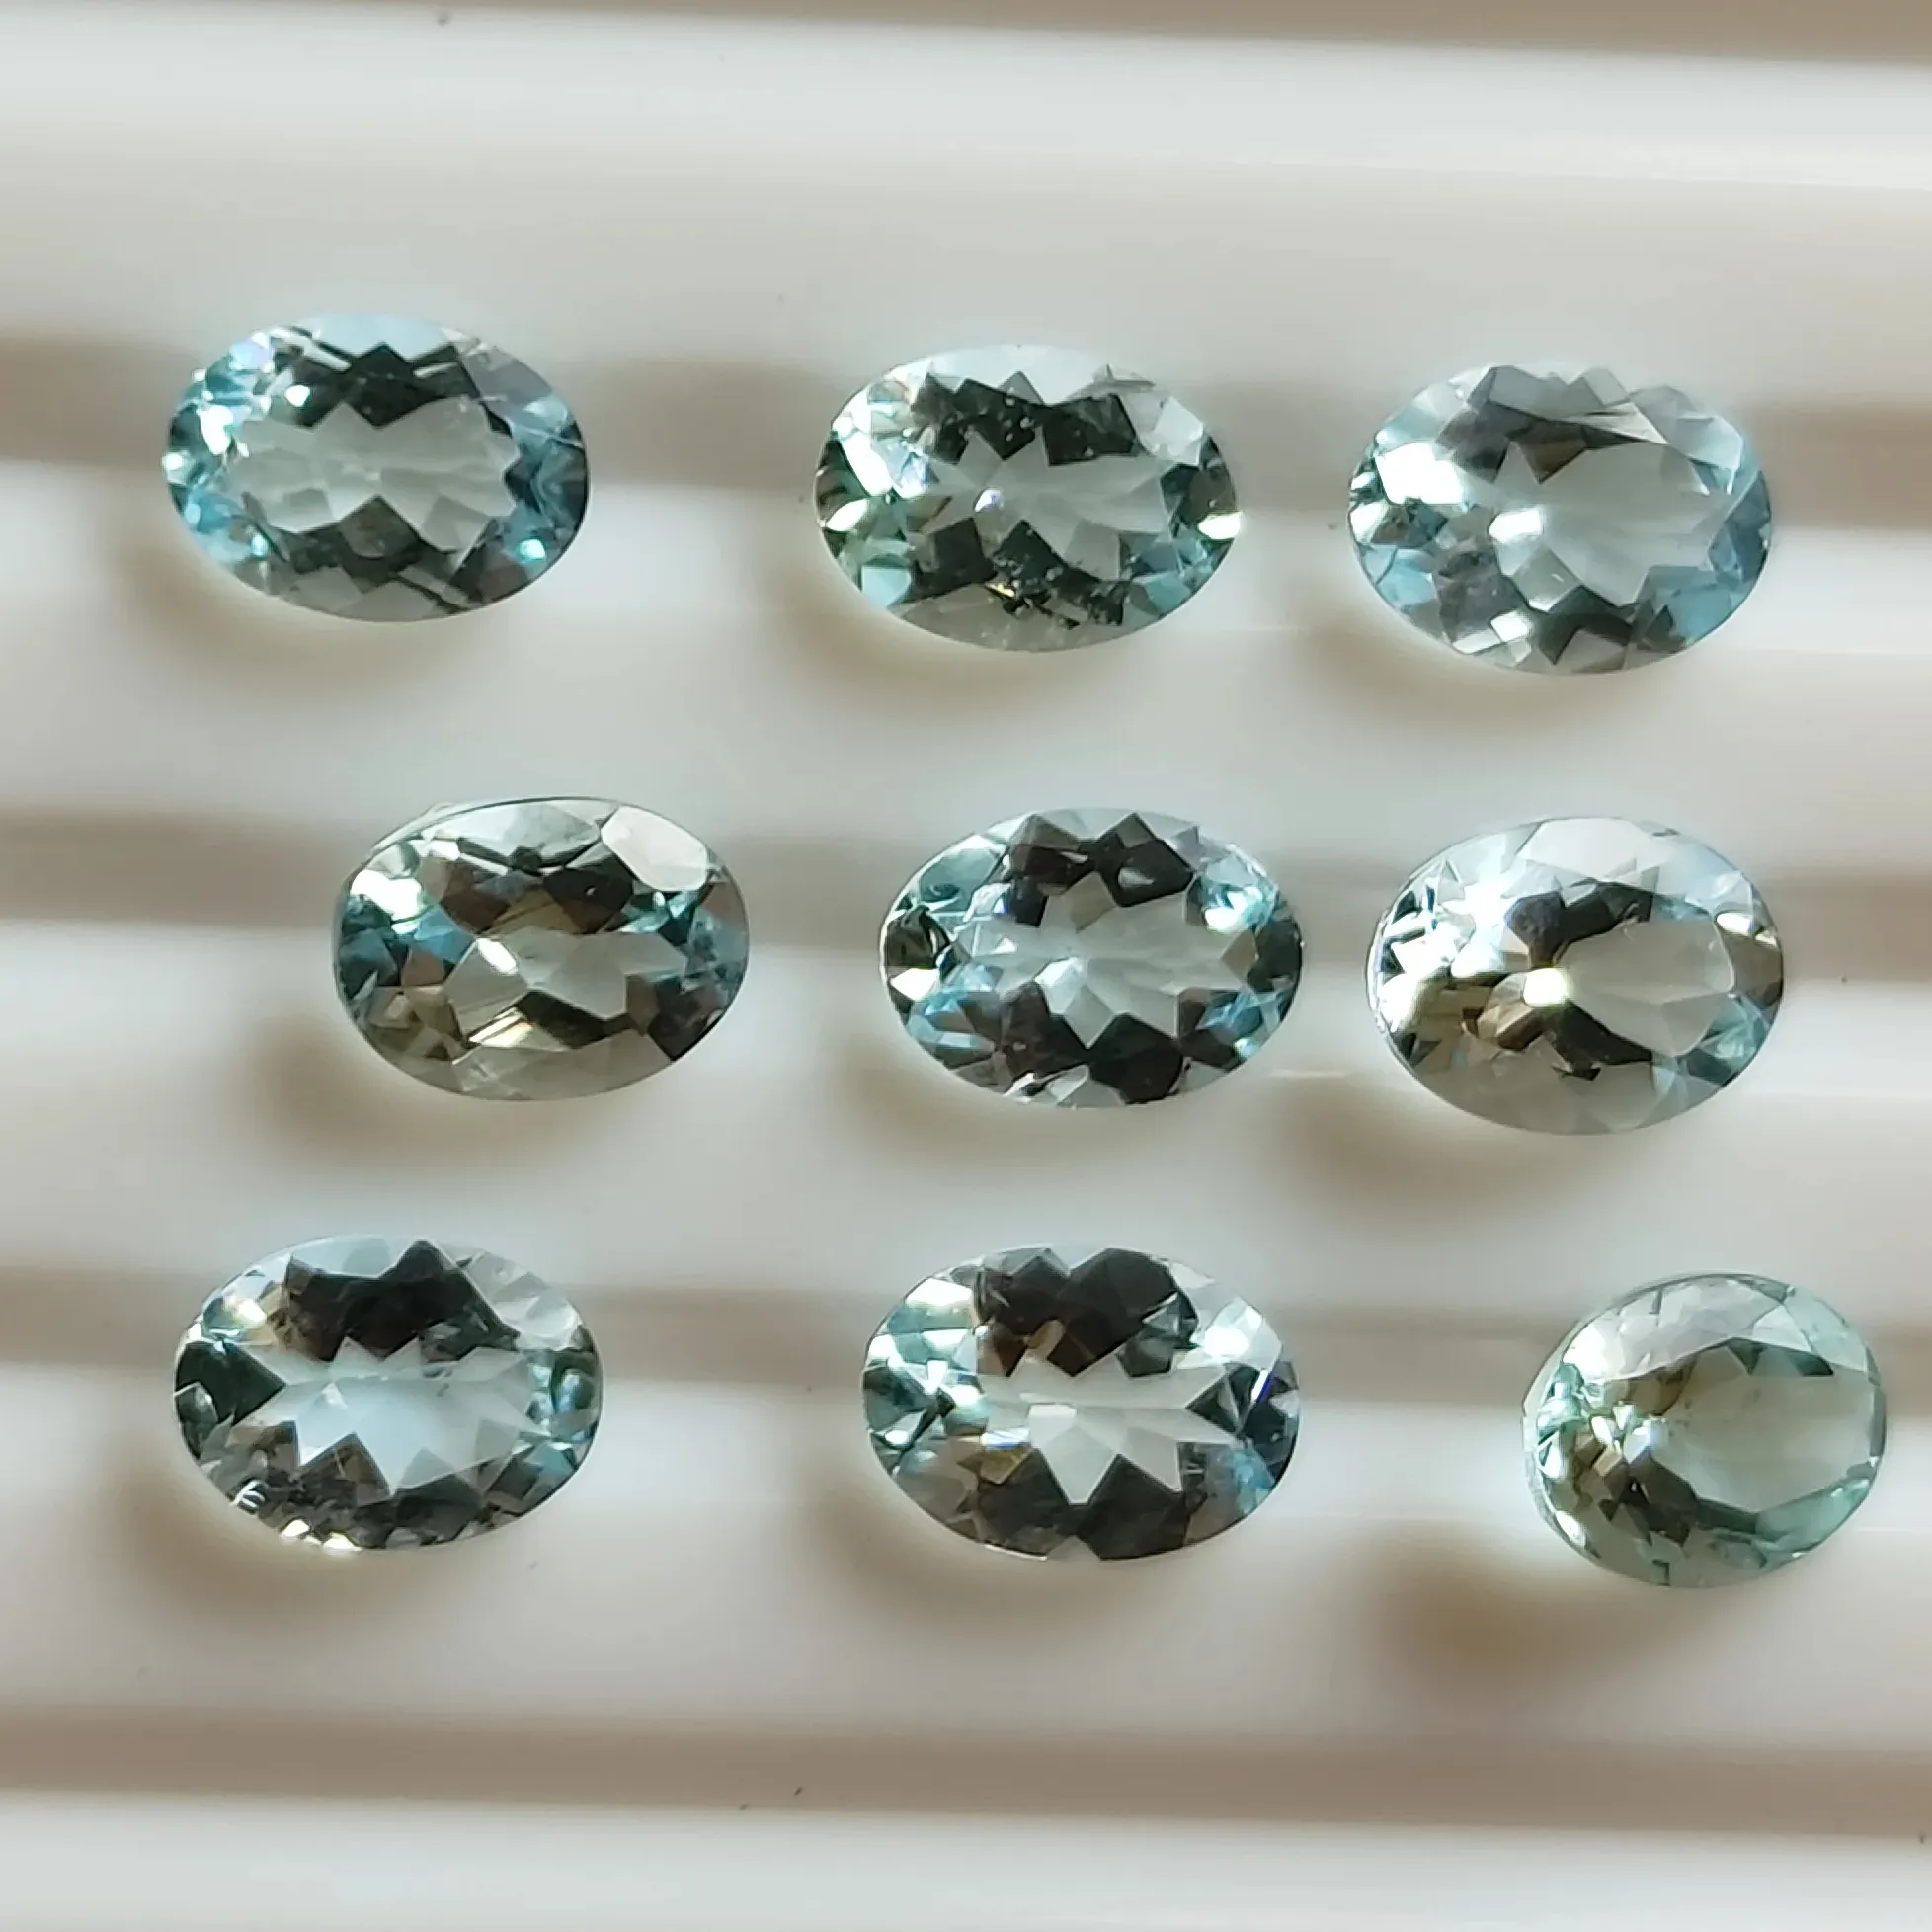 3X5mm Natural Blue Aquamarine Faceted Loose Good Quality Original Gems For Jewelry Making At Wholesale Price